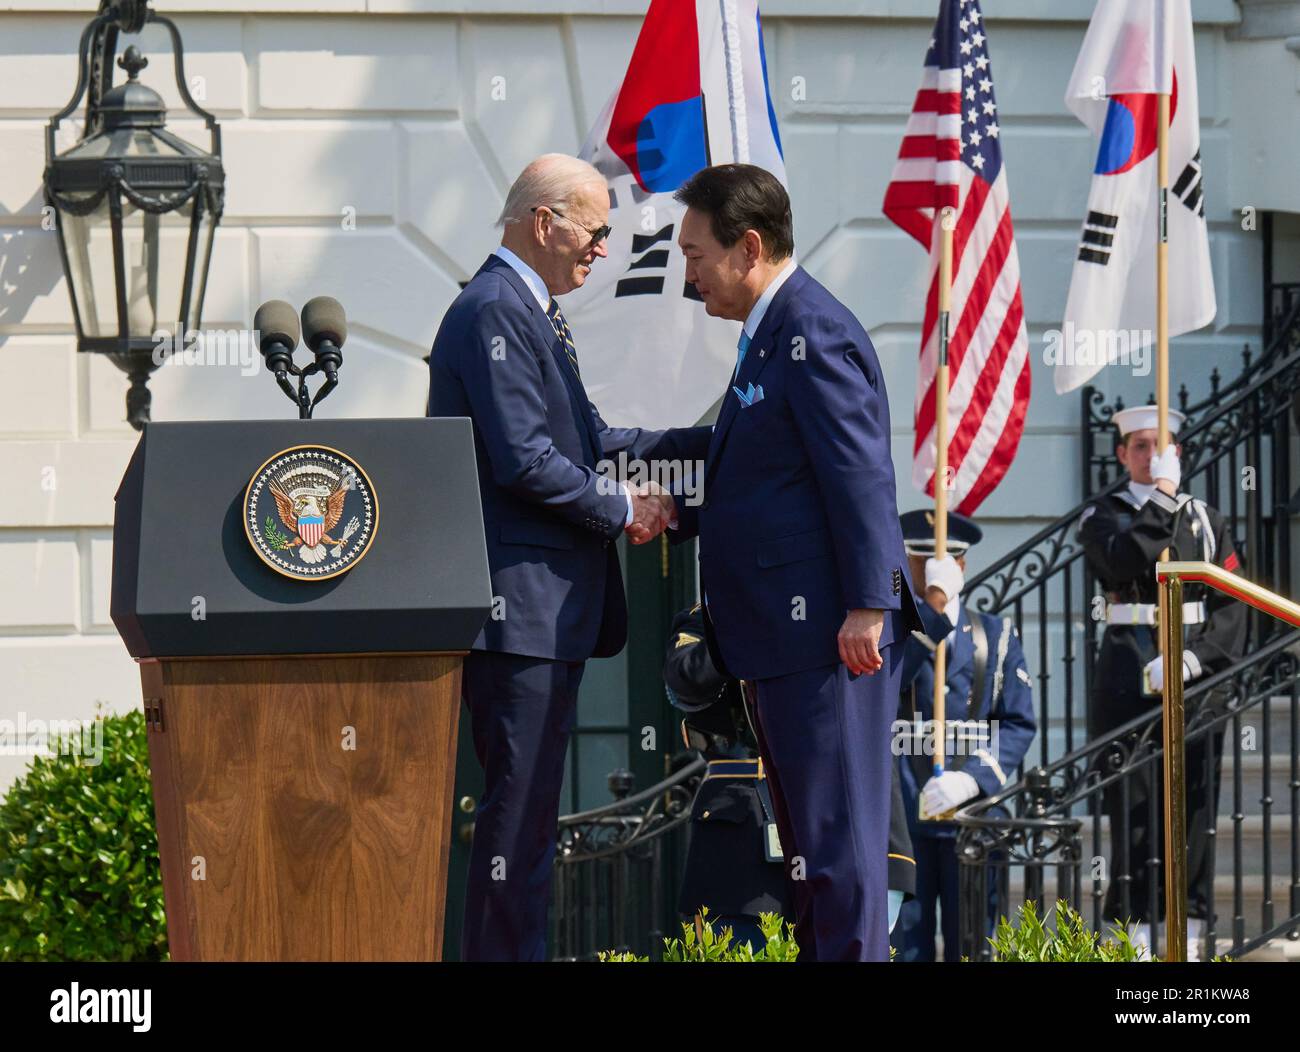 WASHINGTON, D.C., USA - APRIL 26, 2023: The Official Arrival Ceremony for the State Visit of President Yoon Suk Yeol of the Republic of Korea. Stock Photo